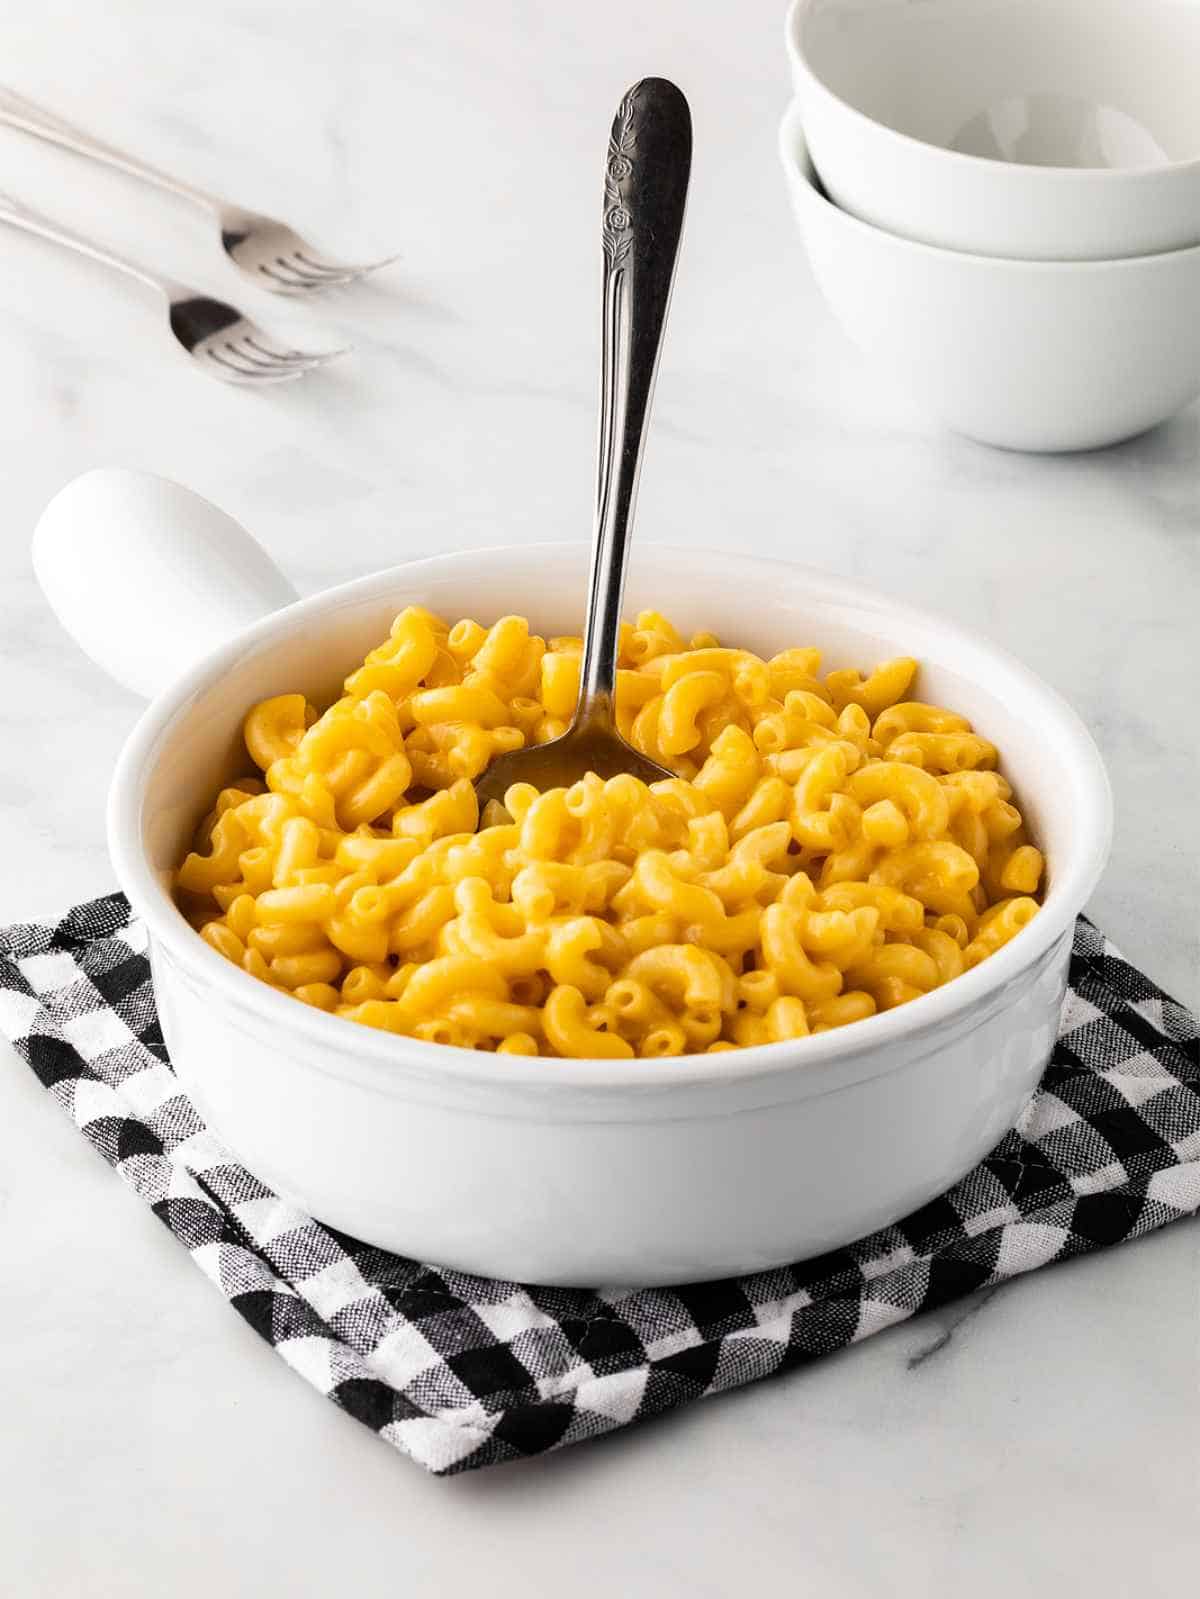 A dish filled with homemade macaroni and cheese with a spoon submerged inside.